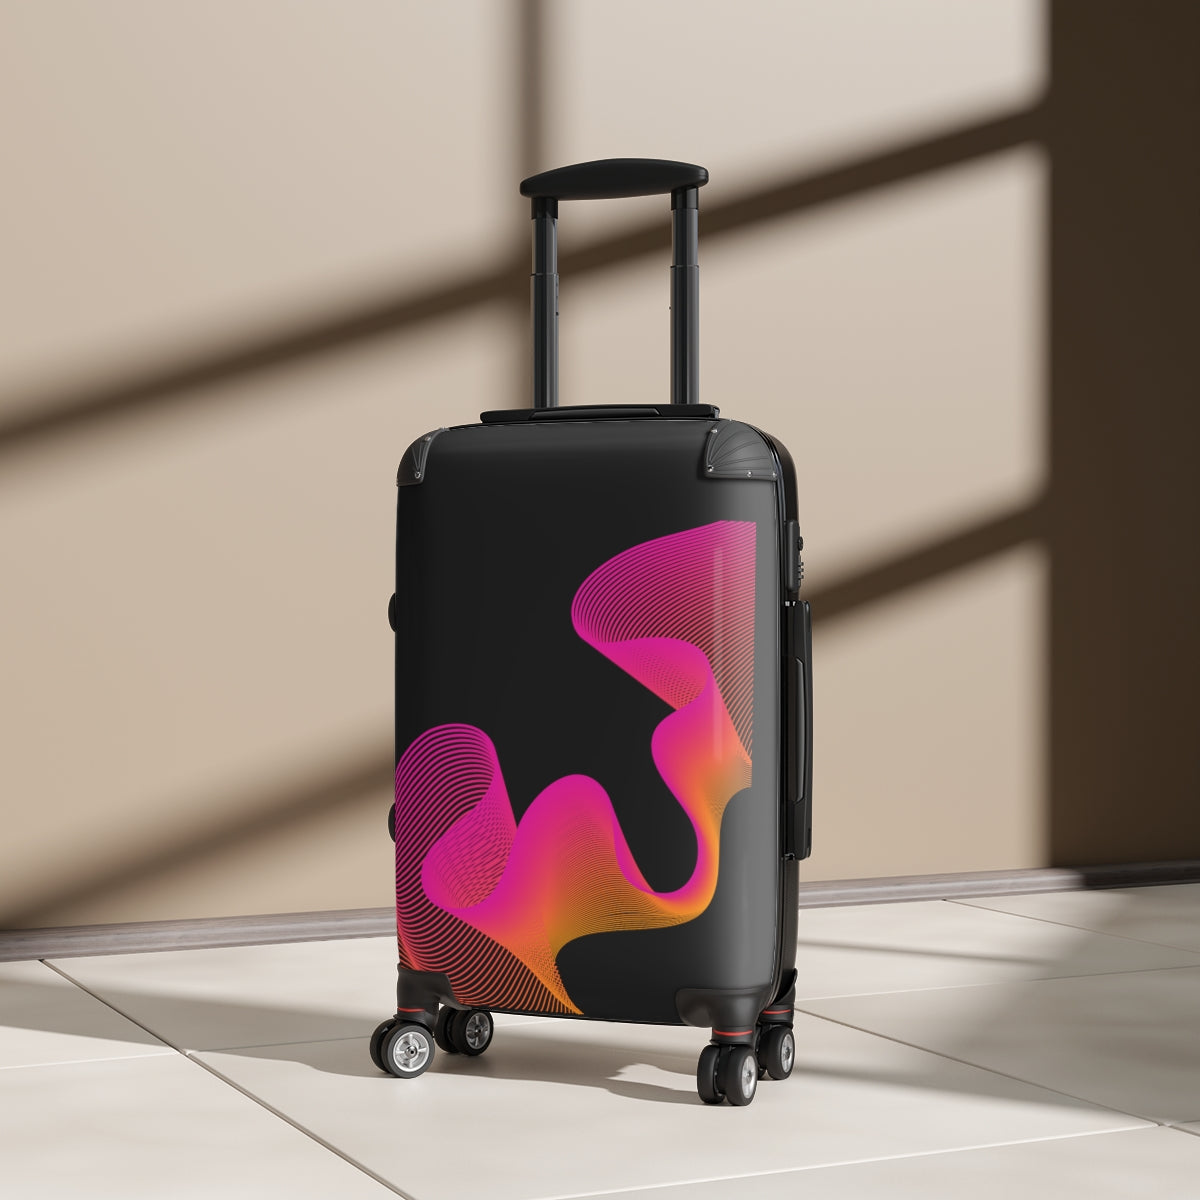 BEST CARRY-ON LUGGAGE BY ARTZIRA, CABIN SUITCASE AND CHECKIN LUGGAGE, PINK ARTISTIC DESIGNS FOR GIRLS, WOMEN, ARTISTS, DOUBLE WHEELED SPINNER